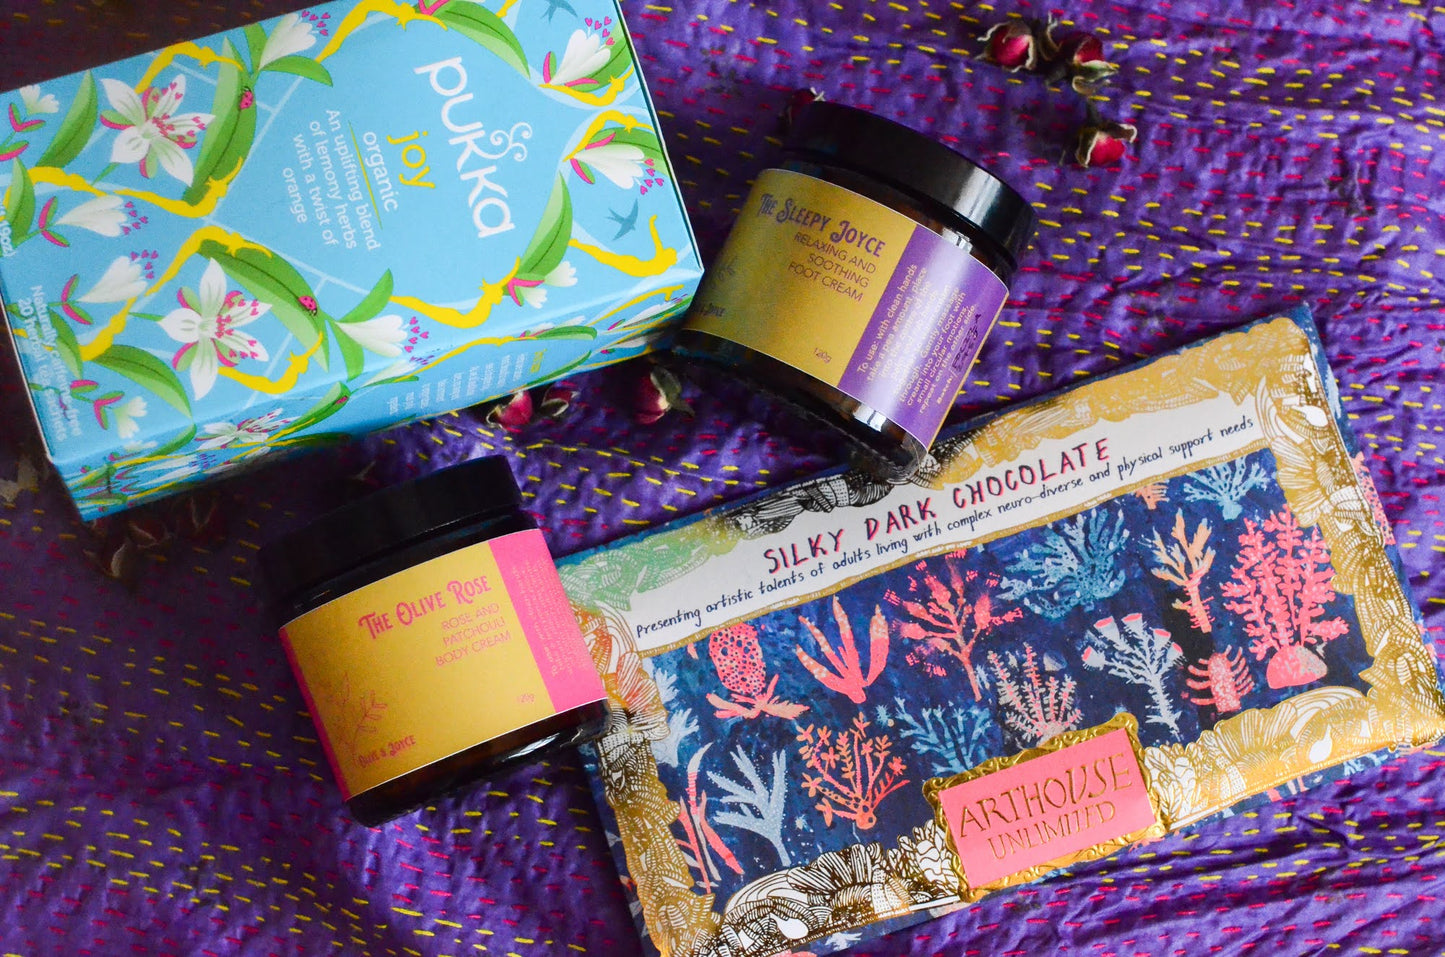 Natural skincare body moisturiser, foot cream, pukka tea and Arthouse unlimited chocolate by the natural skincare company